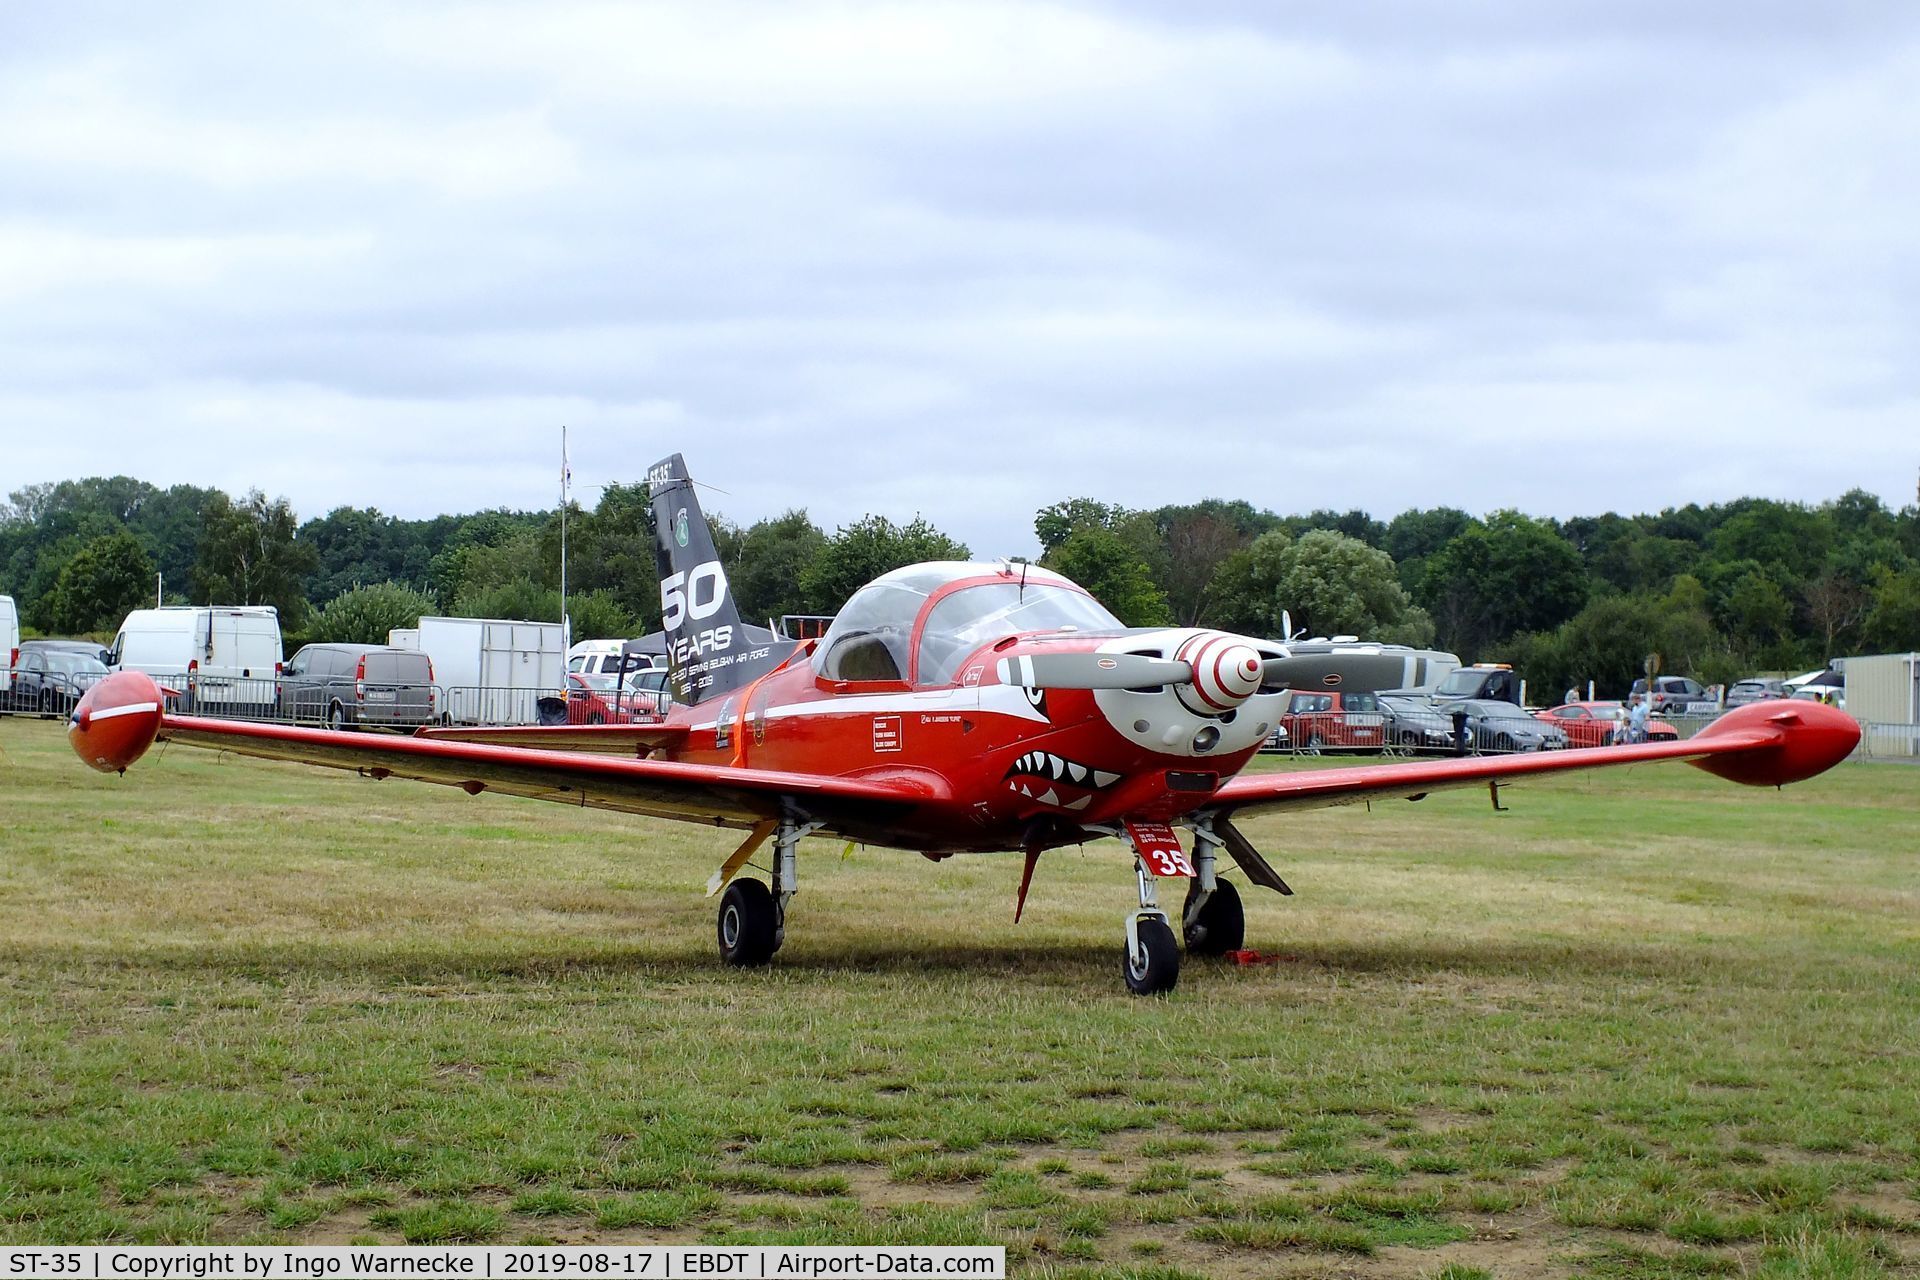 ST-35, SIAI-Marchetti SF-260M C/N 10-35, SIAI-Marchetti SF.260M of the 'Diables Rouges / Red Devils' Belgian Air Force Aerobatic Team at the 2019 Fly-in at Diest/Schaffen airfield